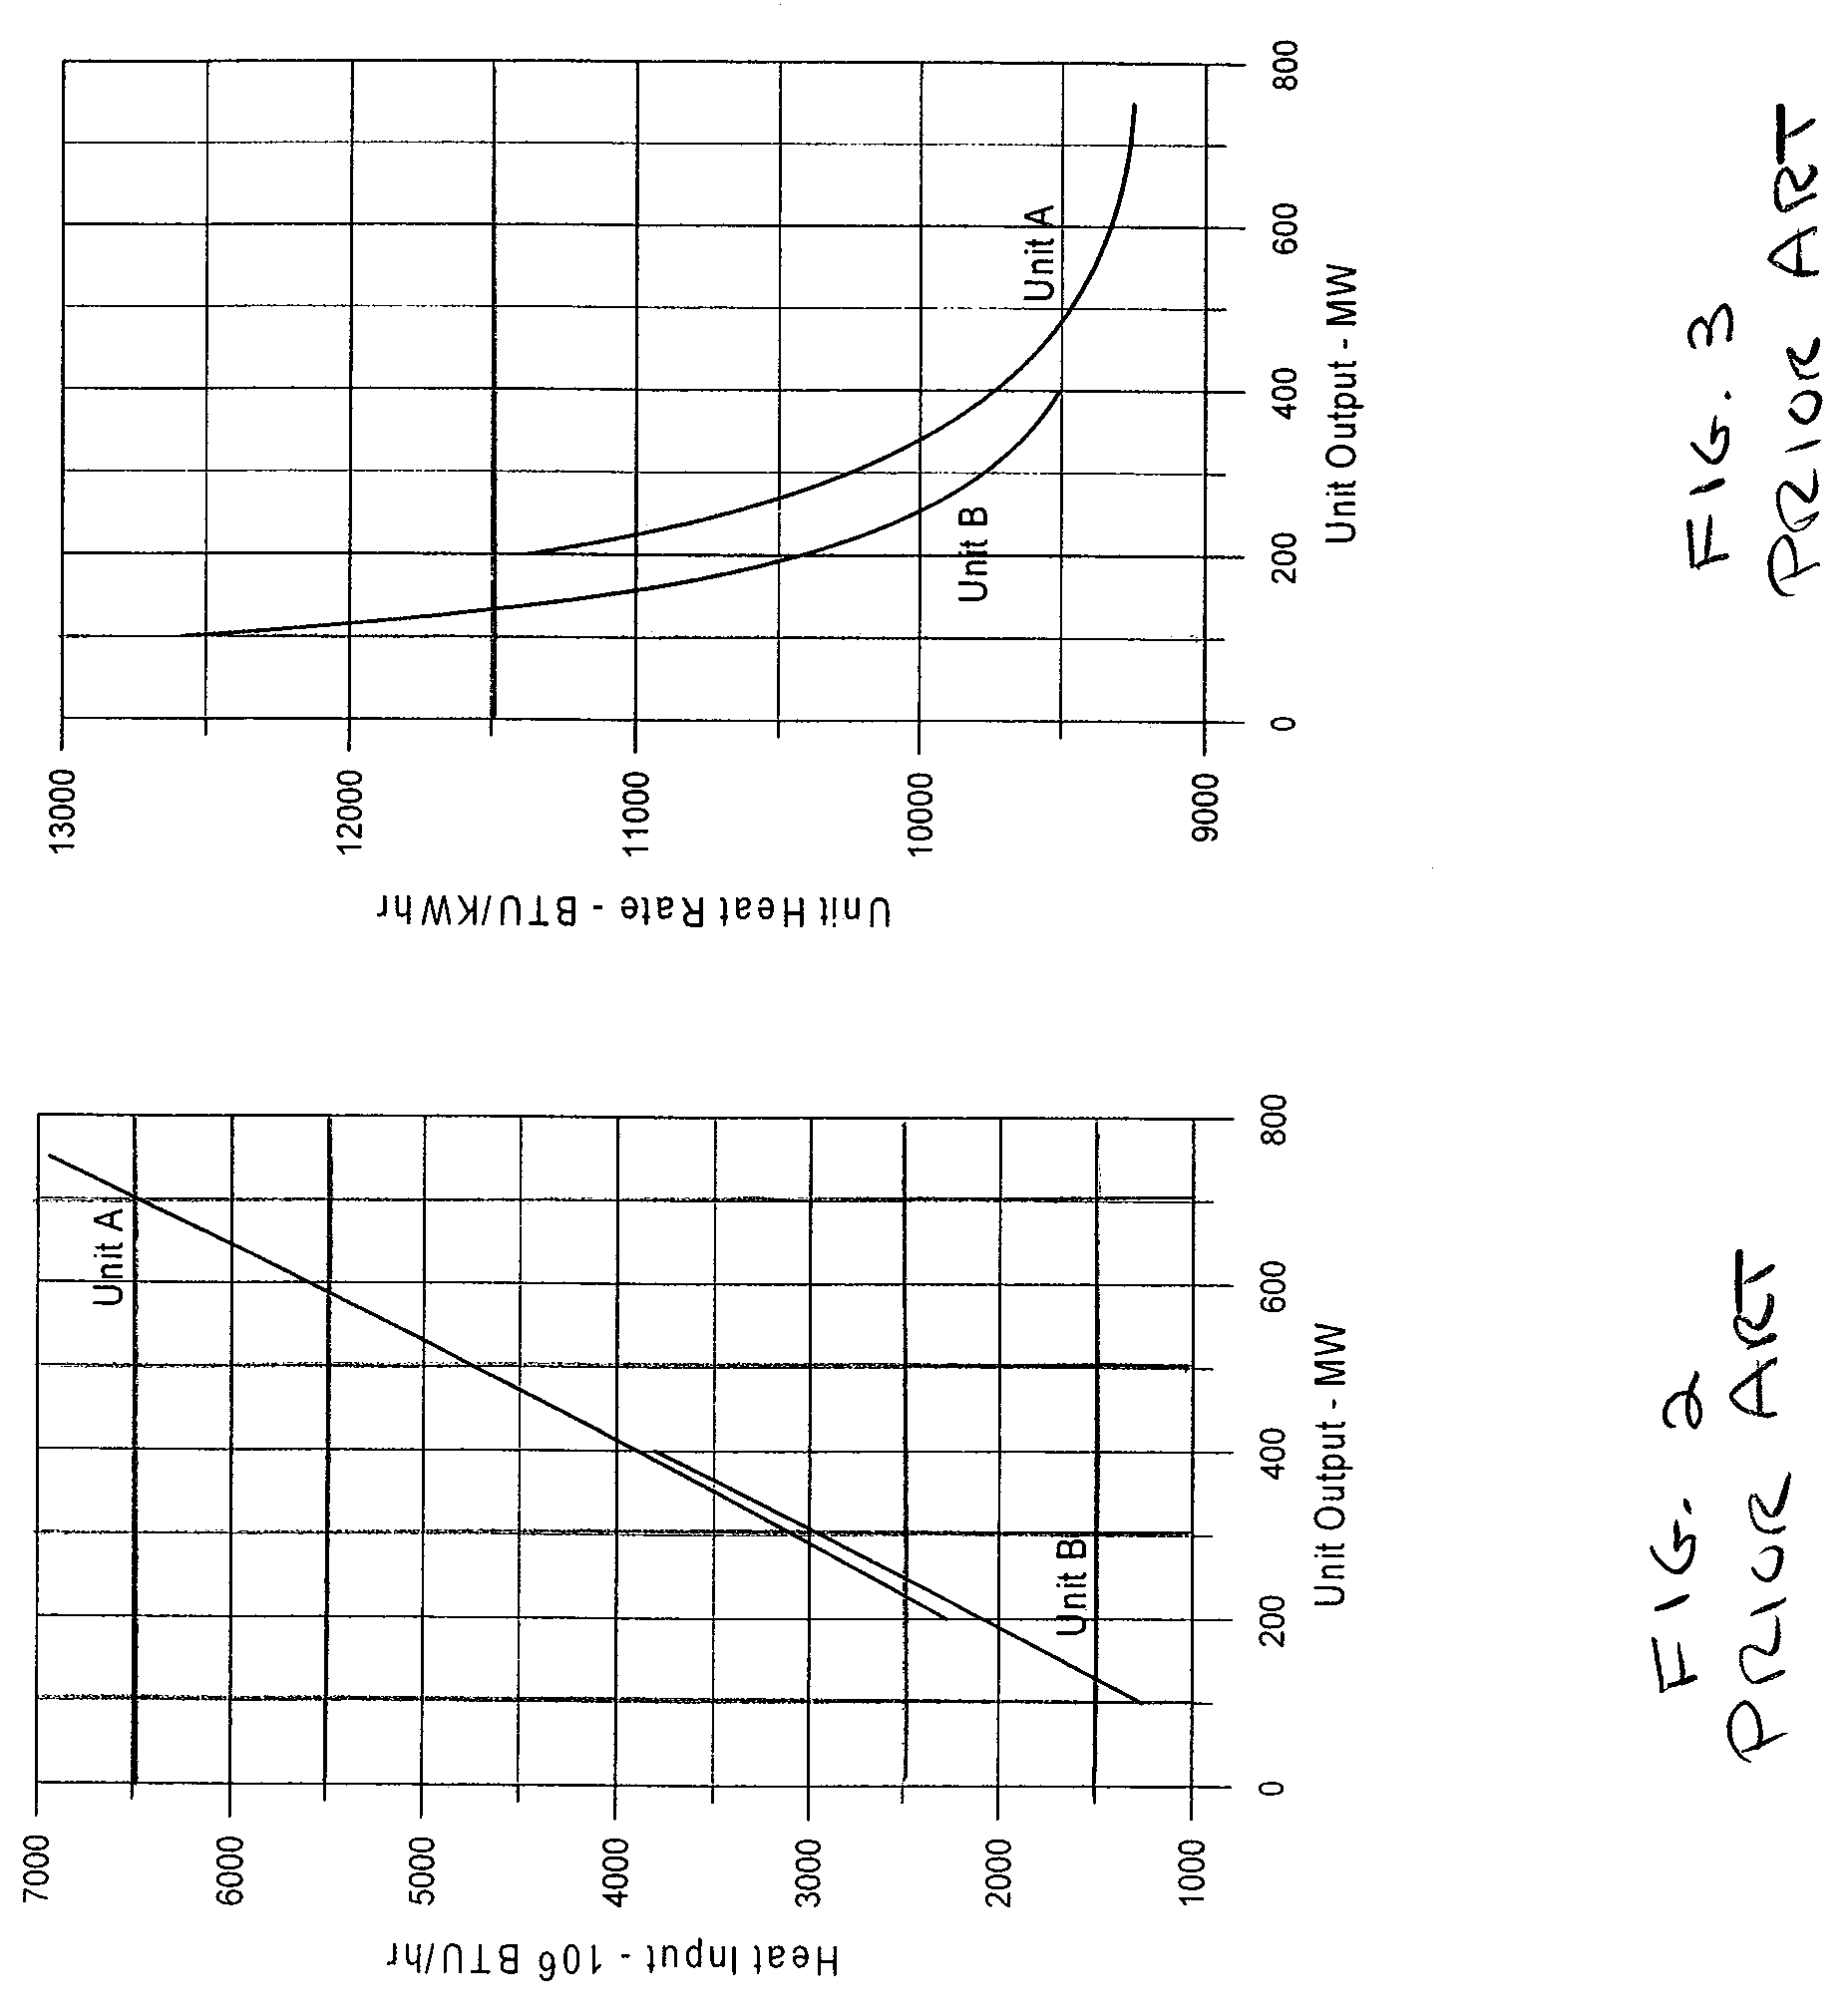 Systems and methods for calculating and predicting near term production cost, incremental heat rate, capacity and emissions of electric generation power plants based on current operating and, optionally, atmospheric conditions